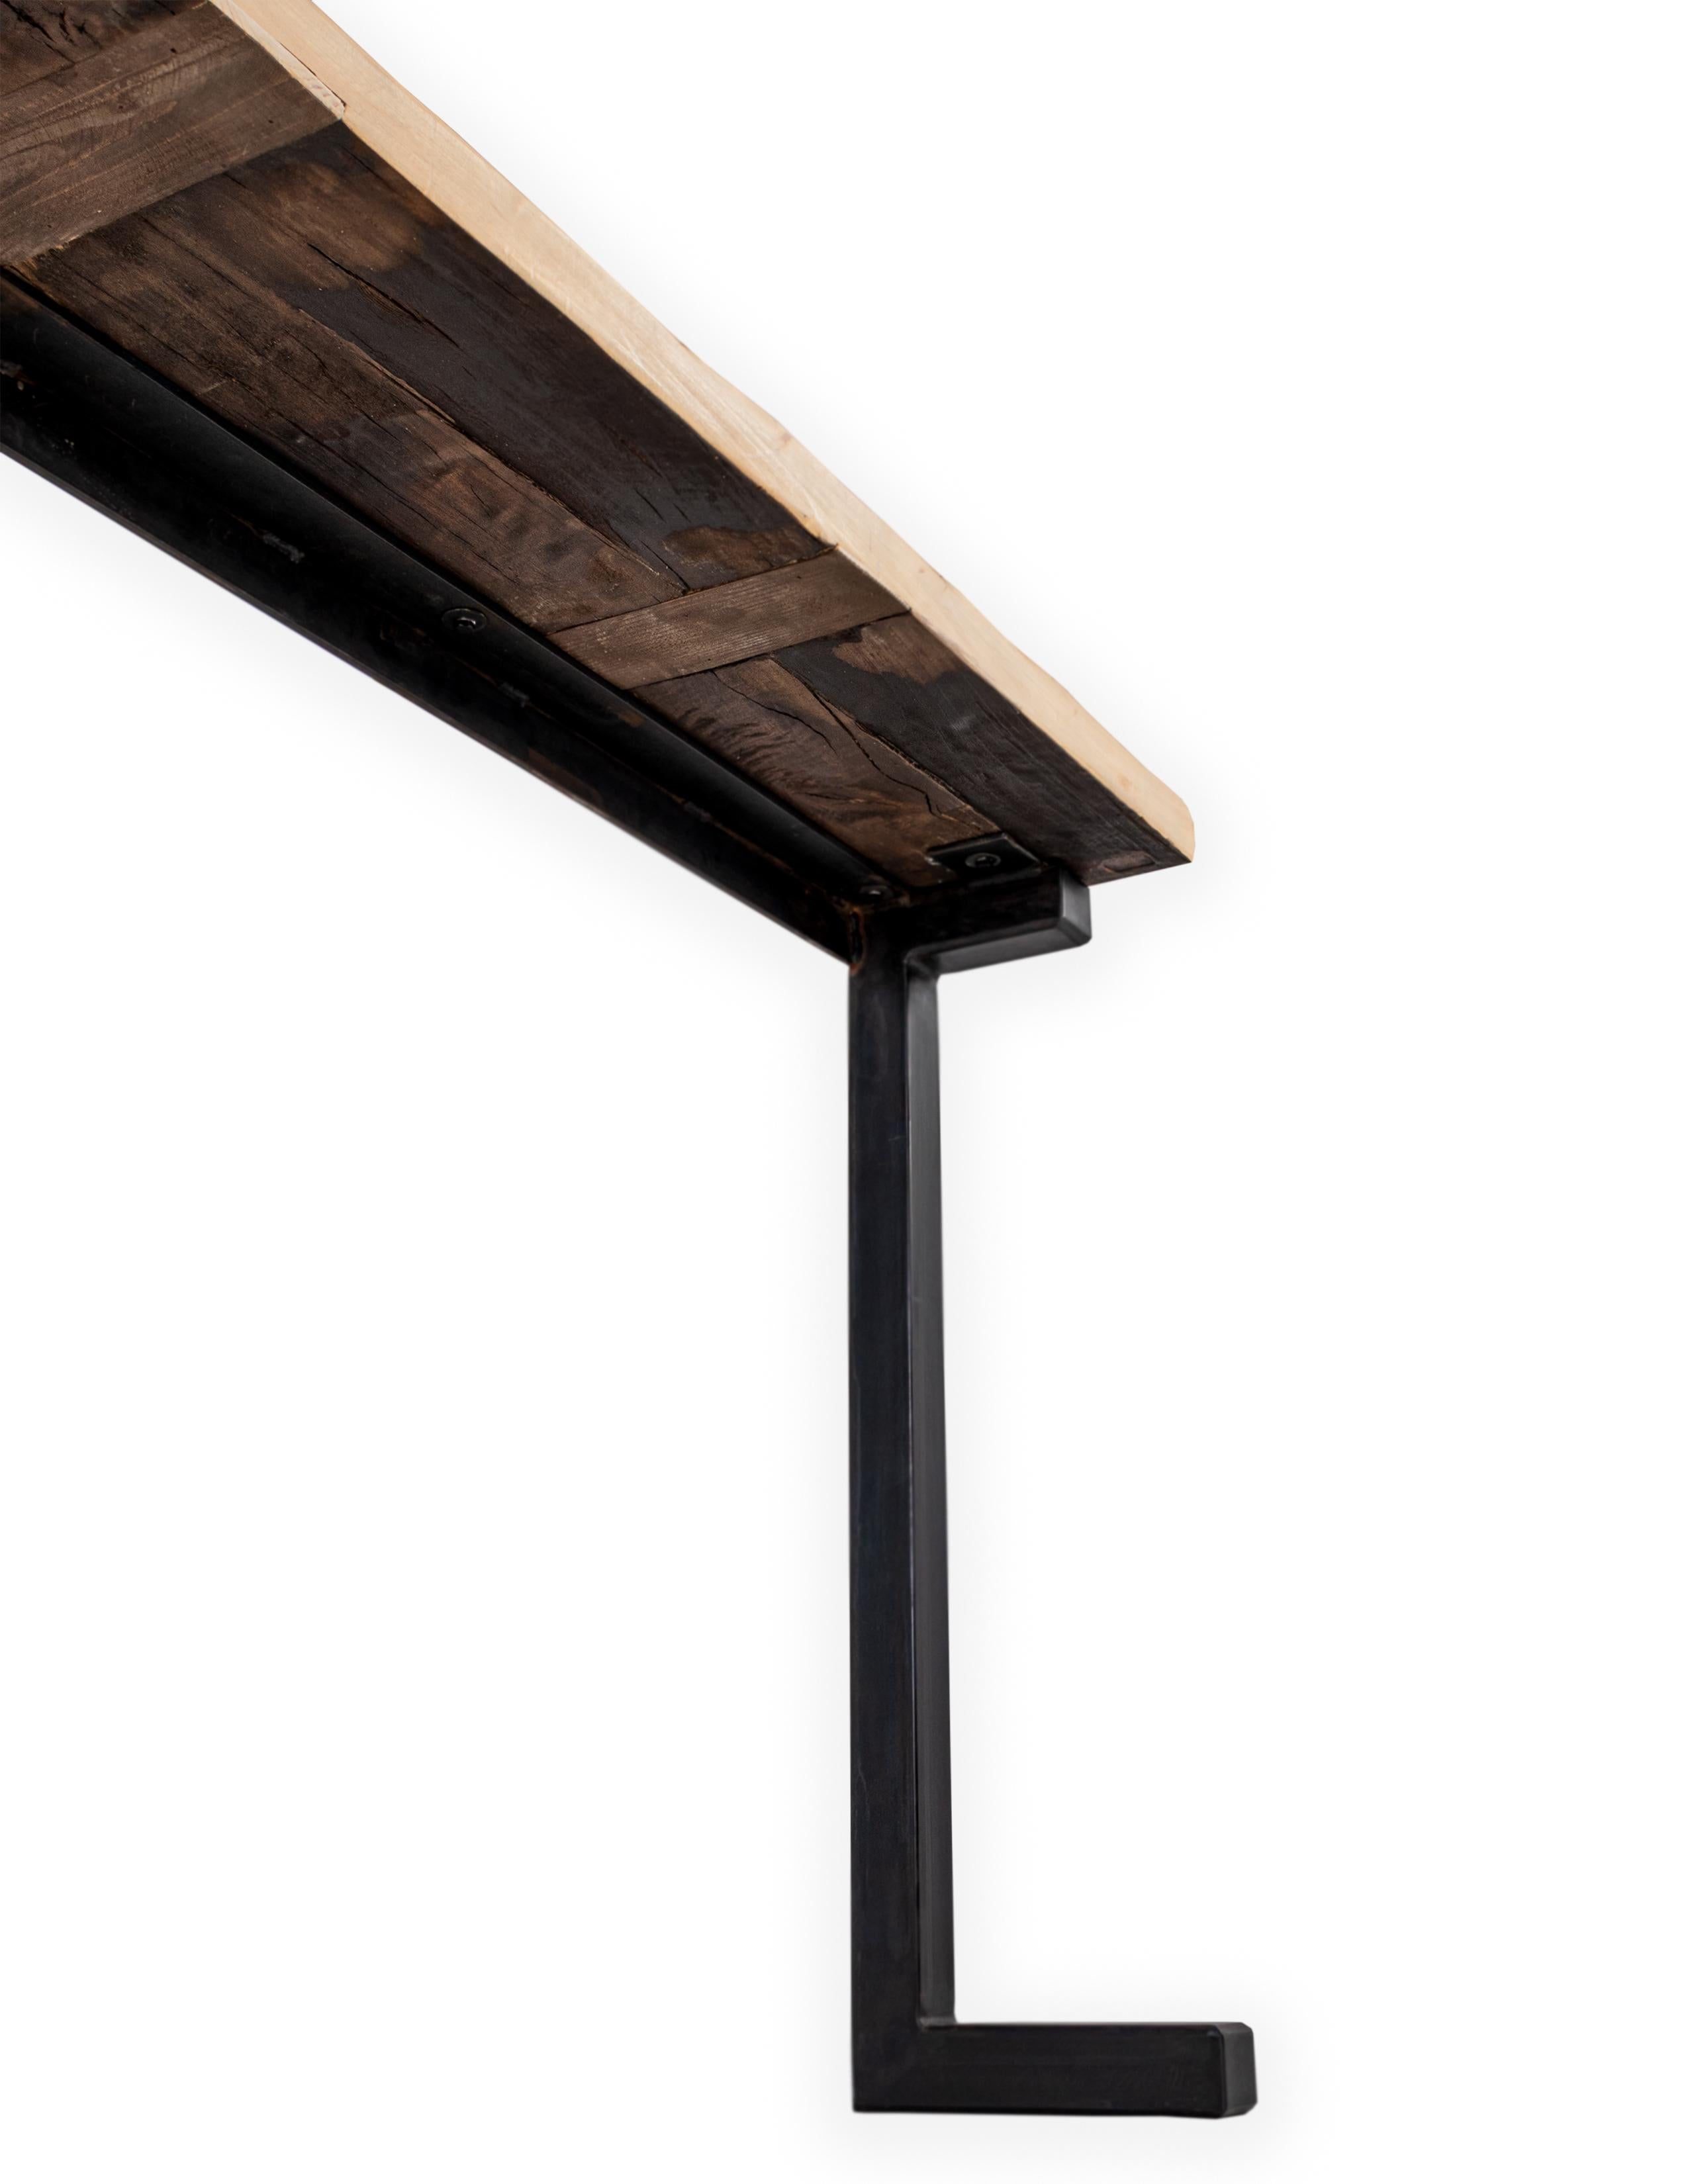 Organic Modern Minimalist Console with a Reclaimed Bleached Elm Top and a Ebony Patina Steel Ba